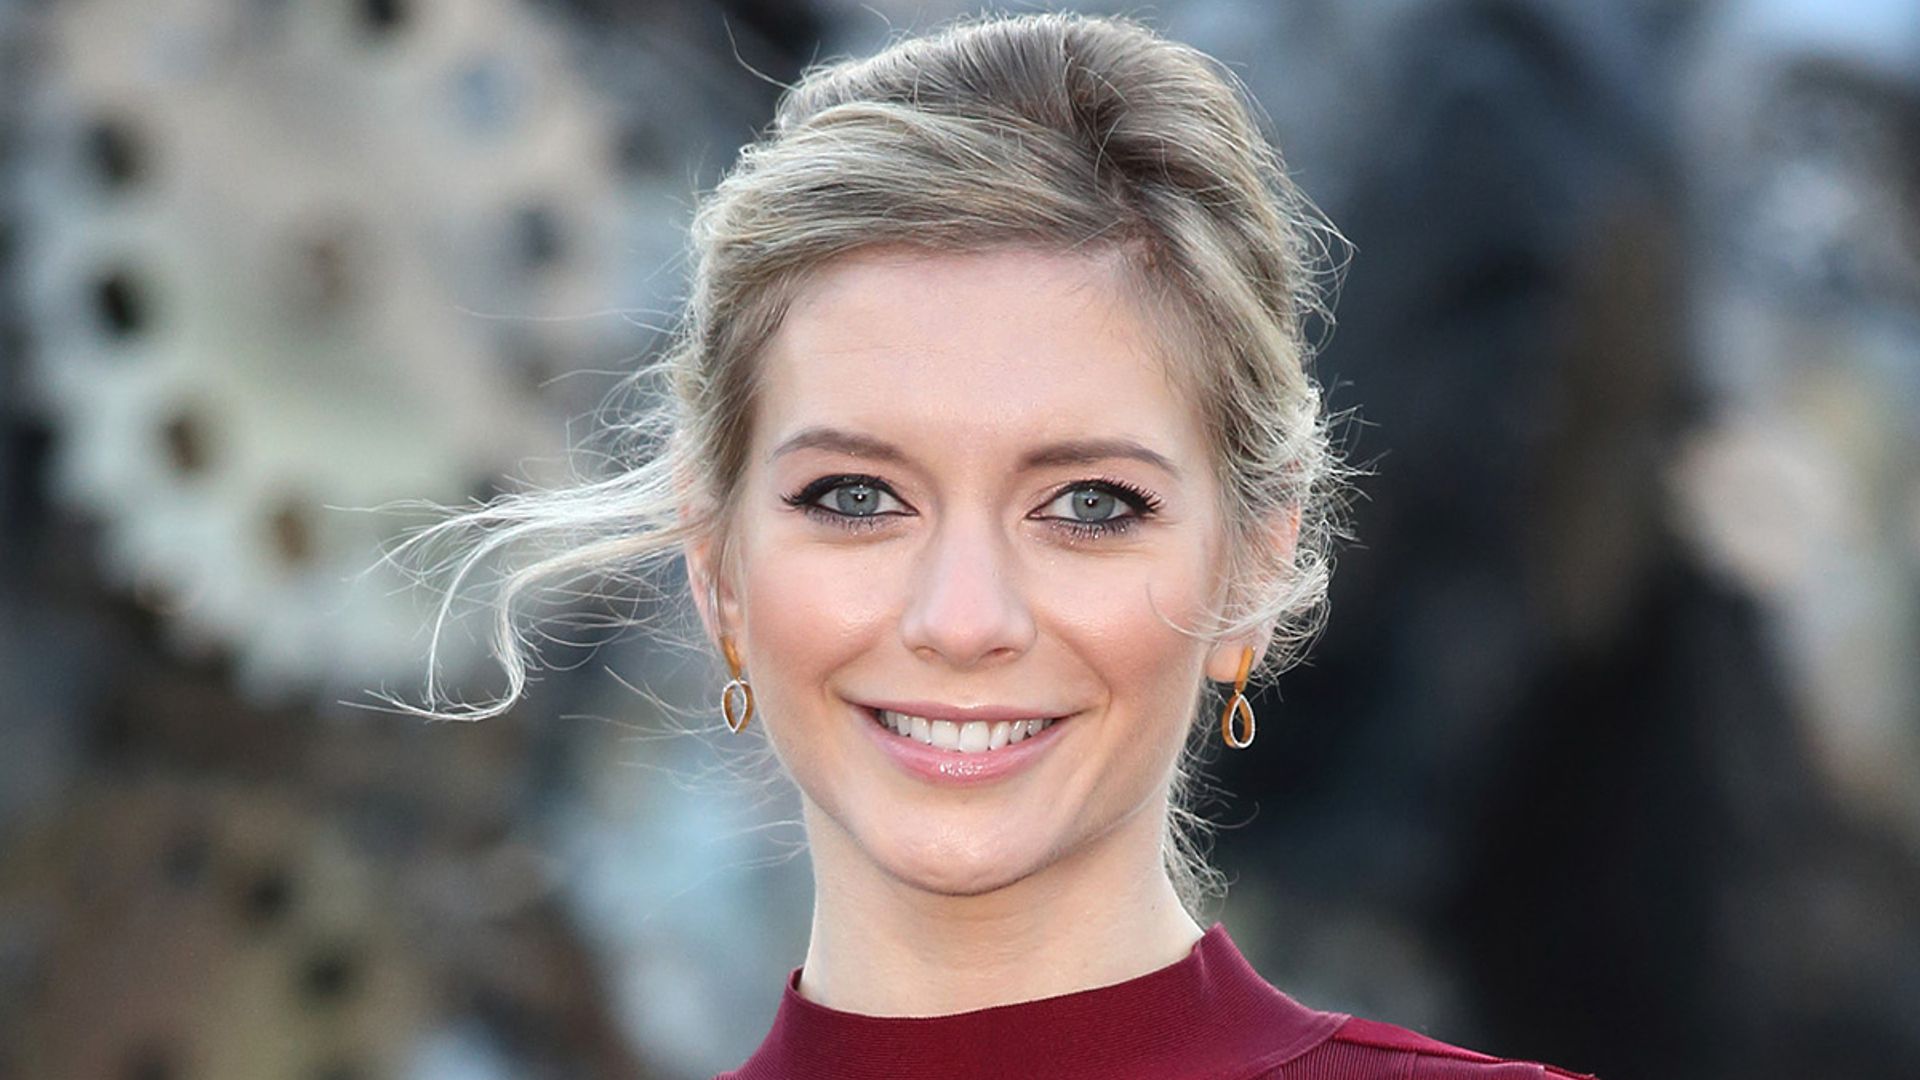 Rachel Riley issues apology to Jedward after Twitter spat